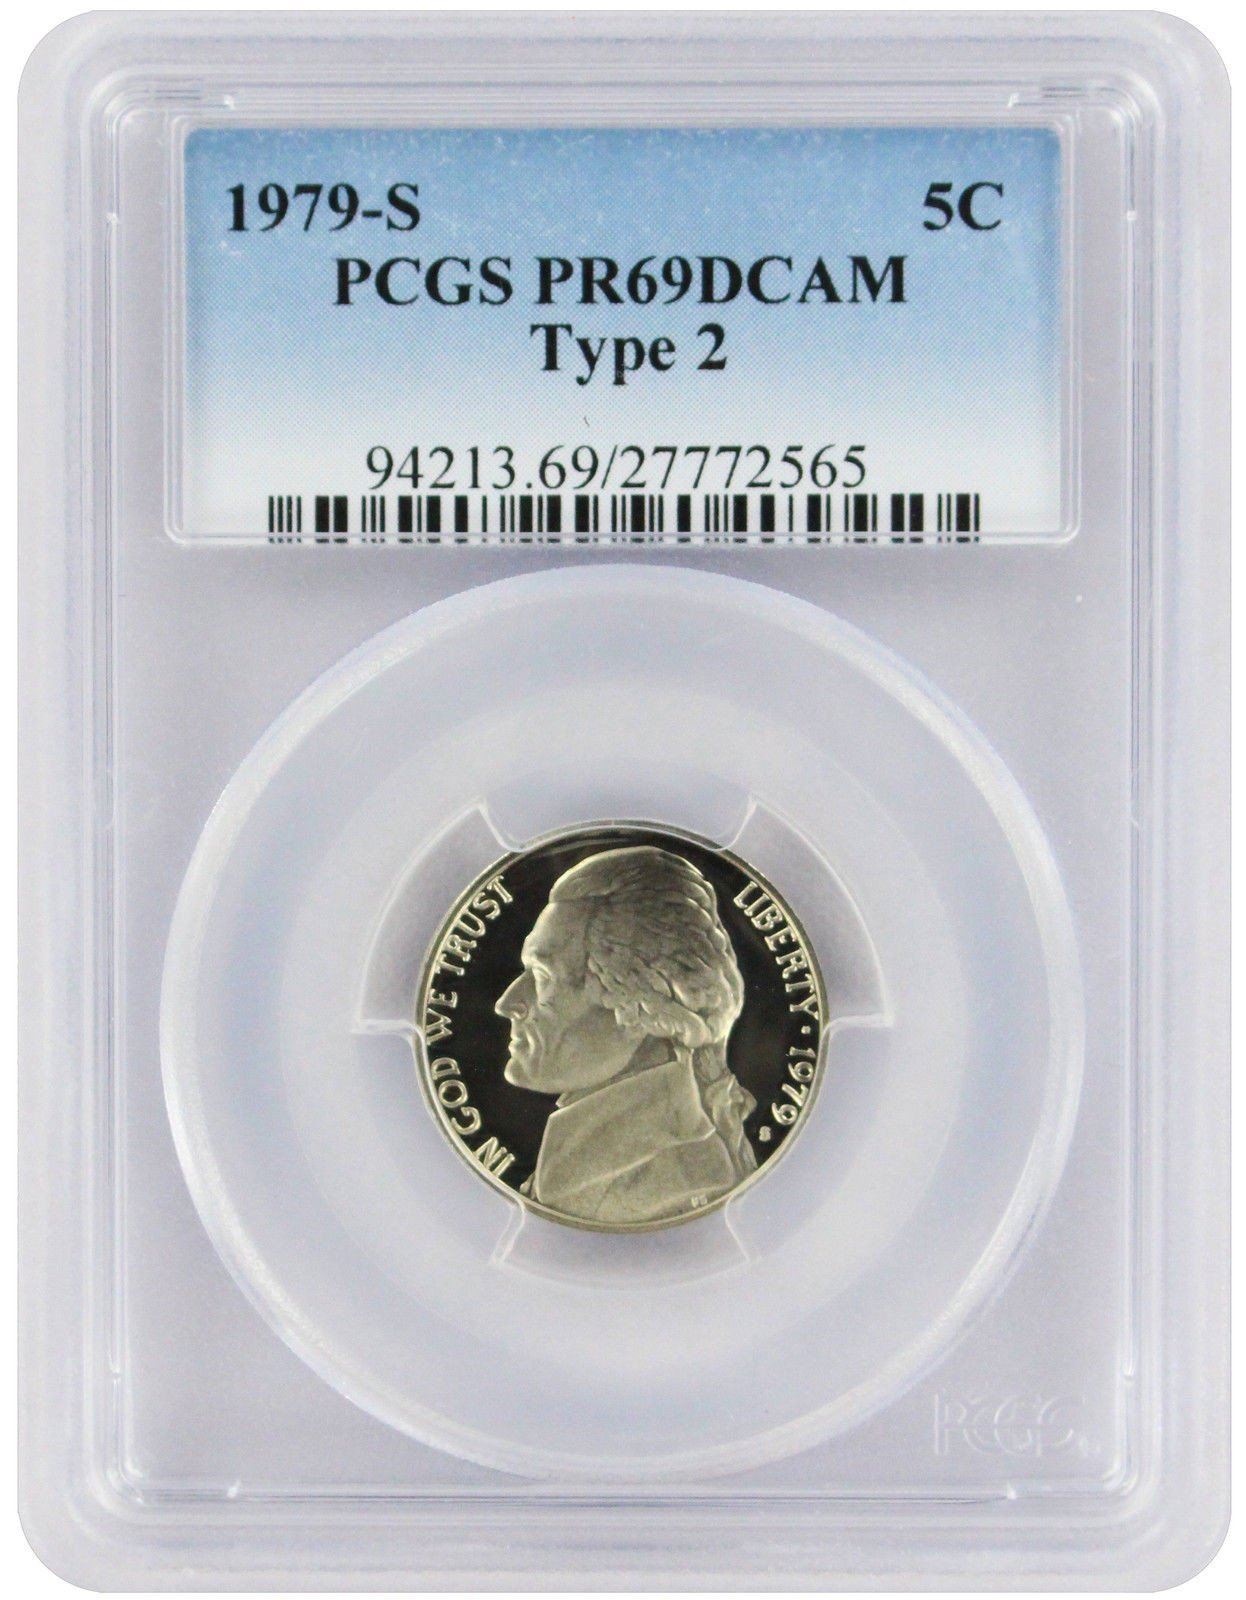 Primary image for 1979-S Type 2 Jefferson Nickel PR69DCAM PCGS  Clear 'S'  20180061